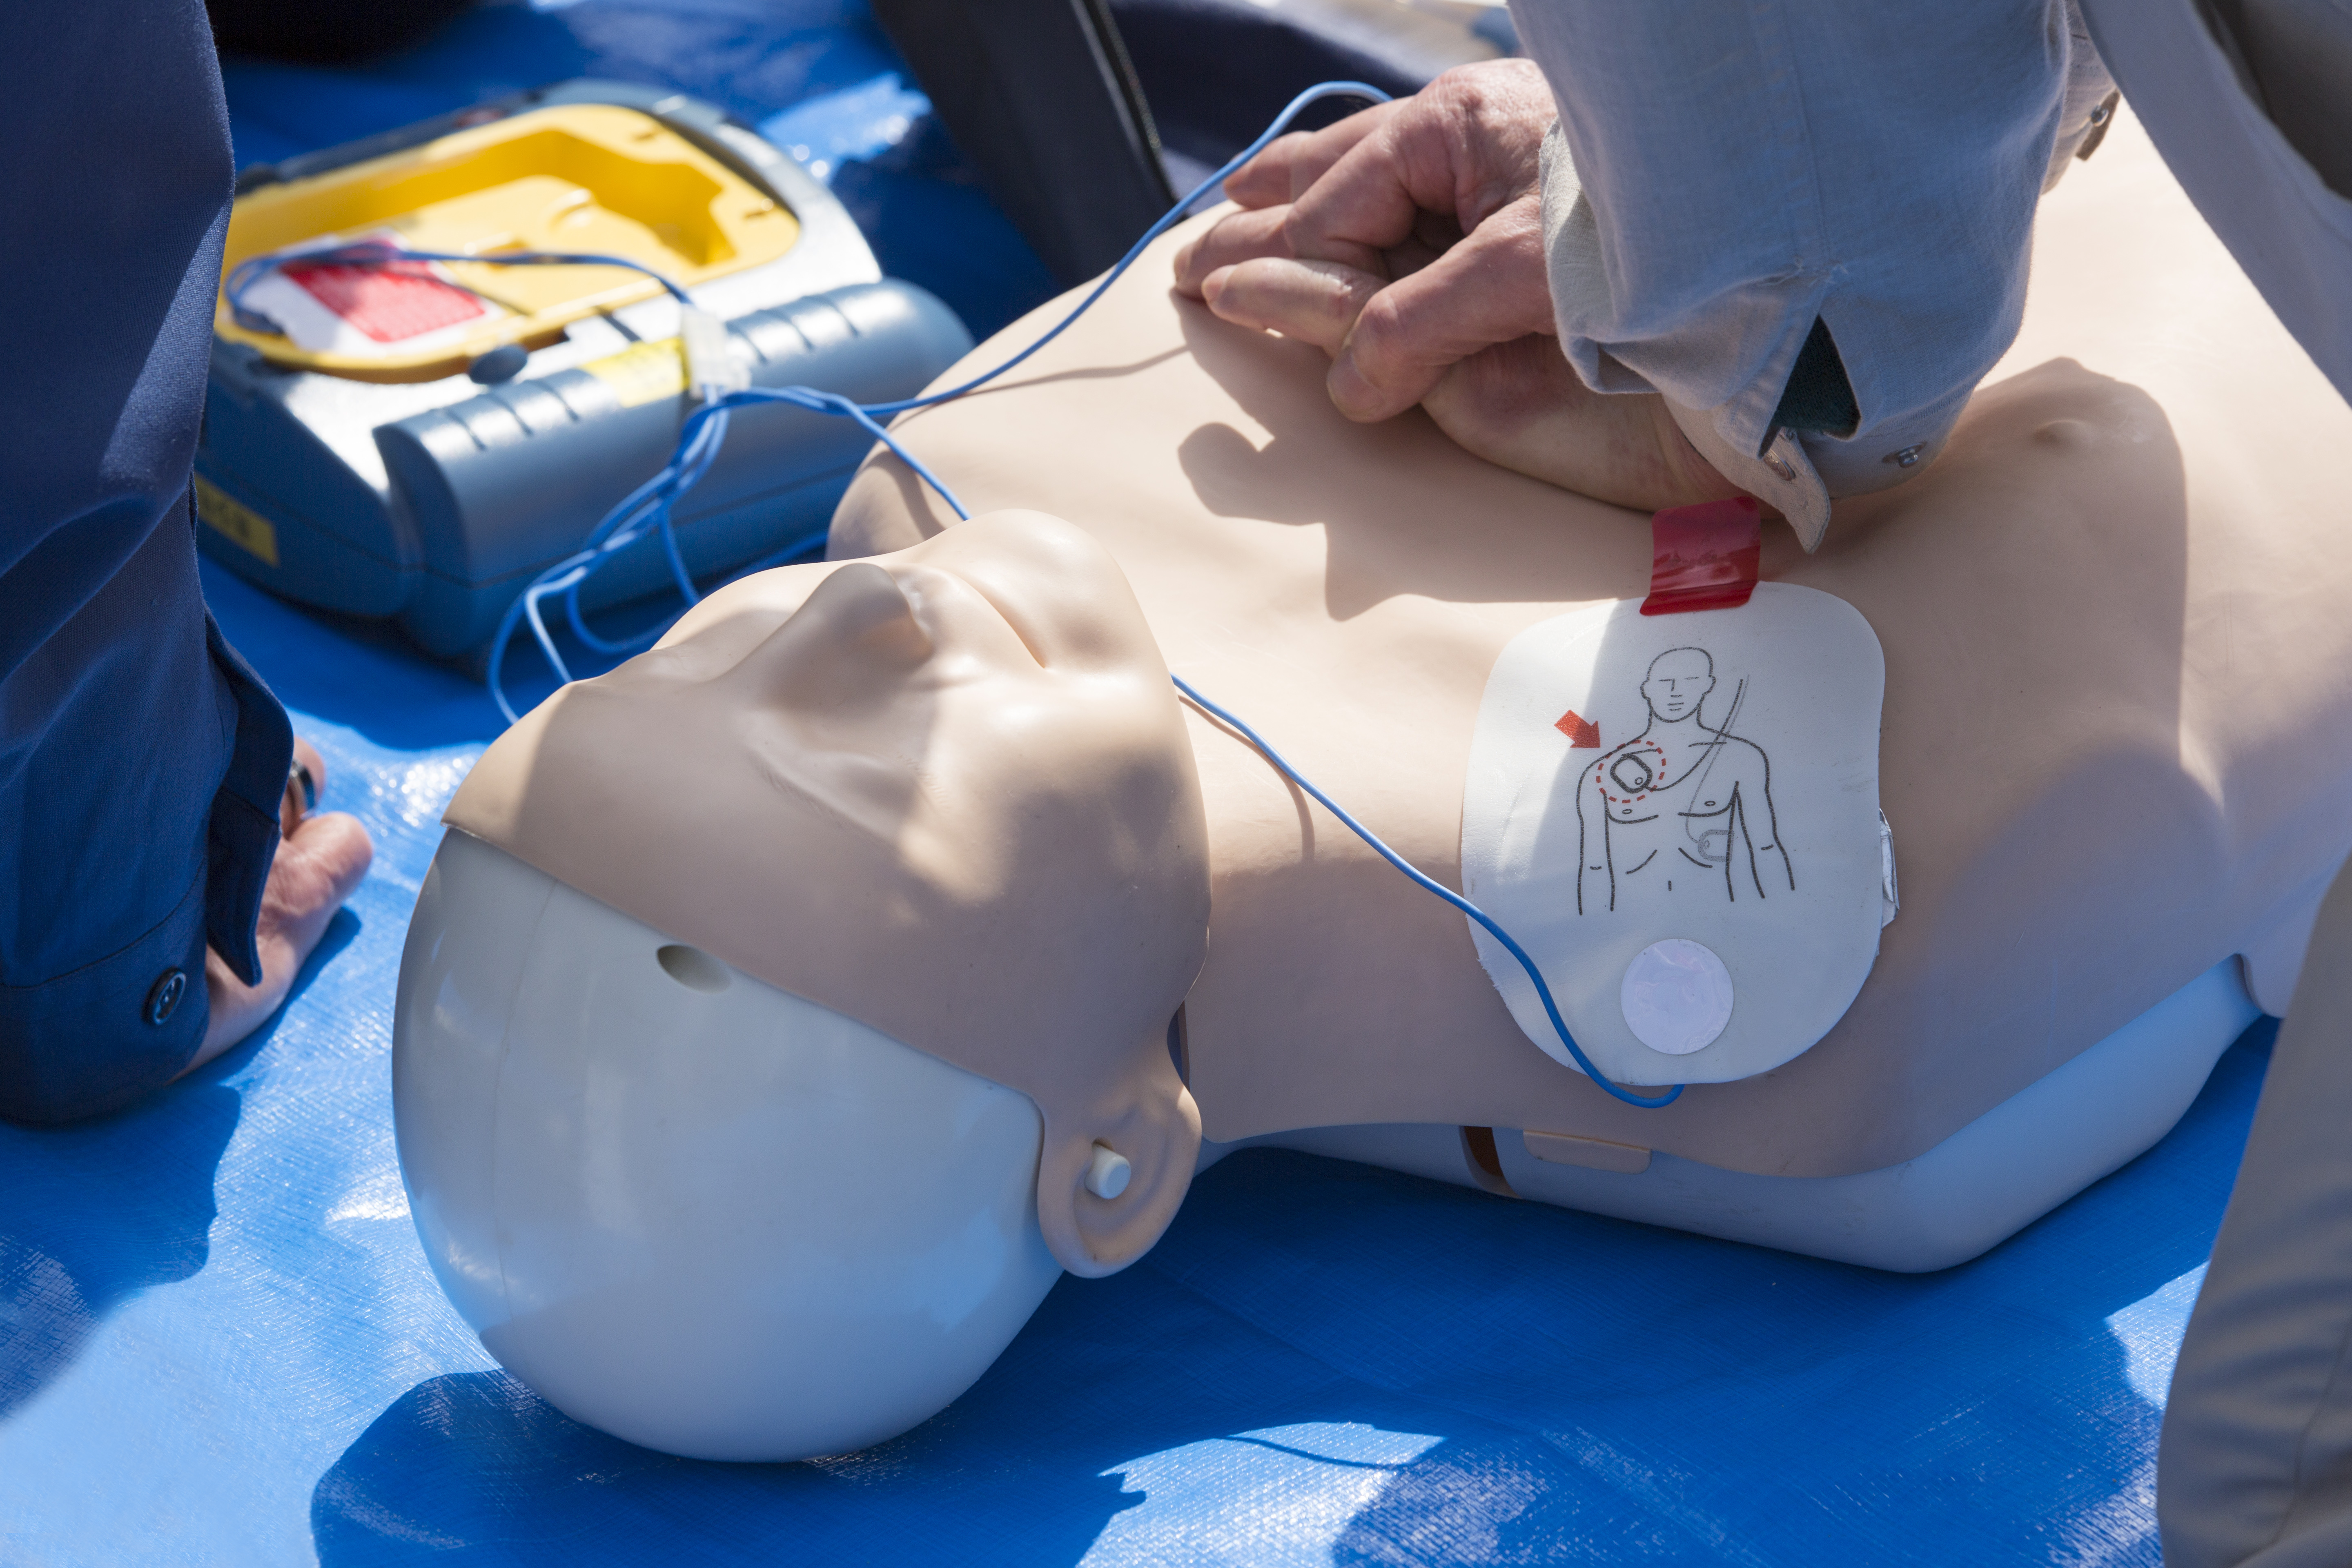 aed in use